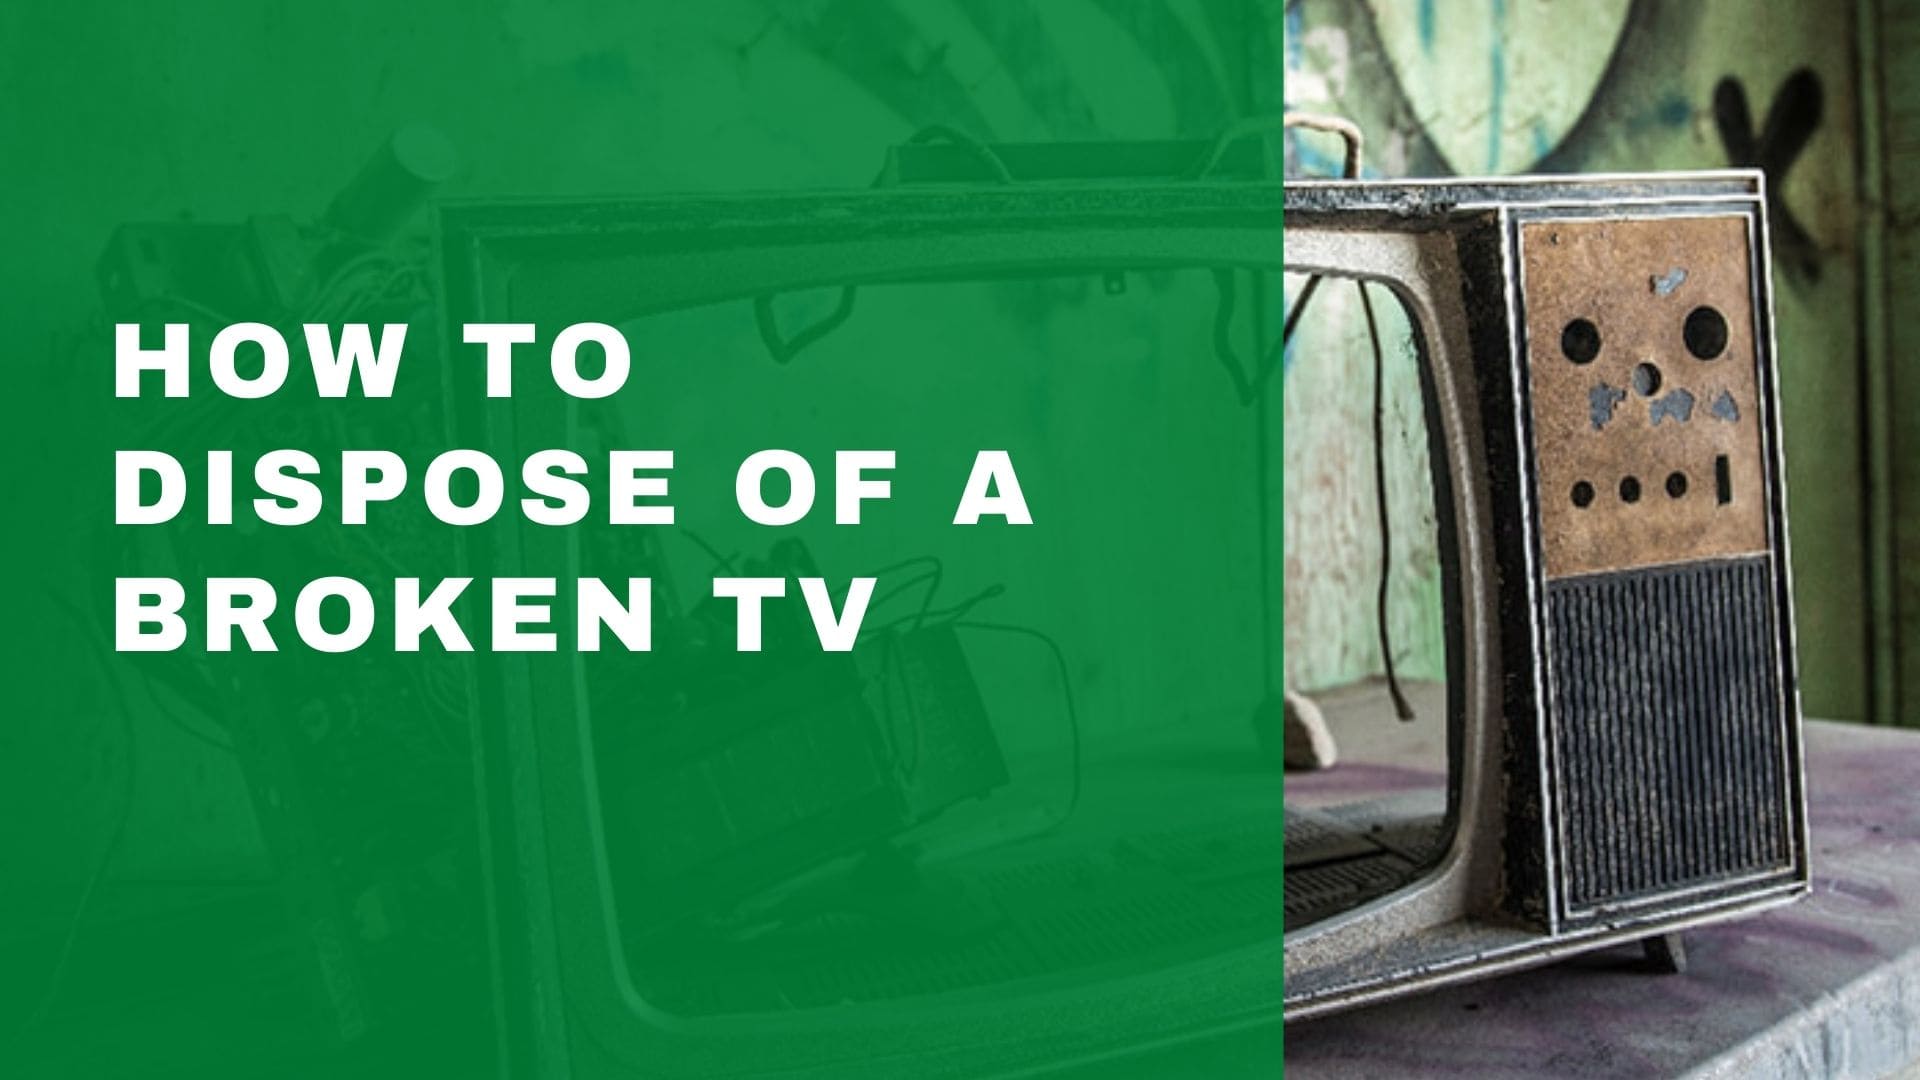 How To Dispose Of A Broken TV